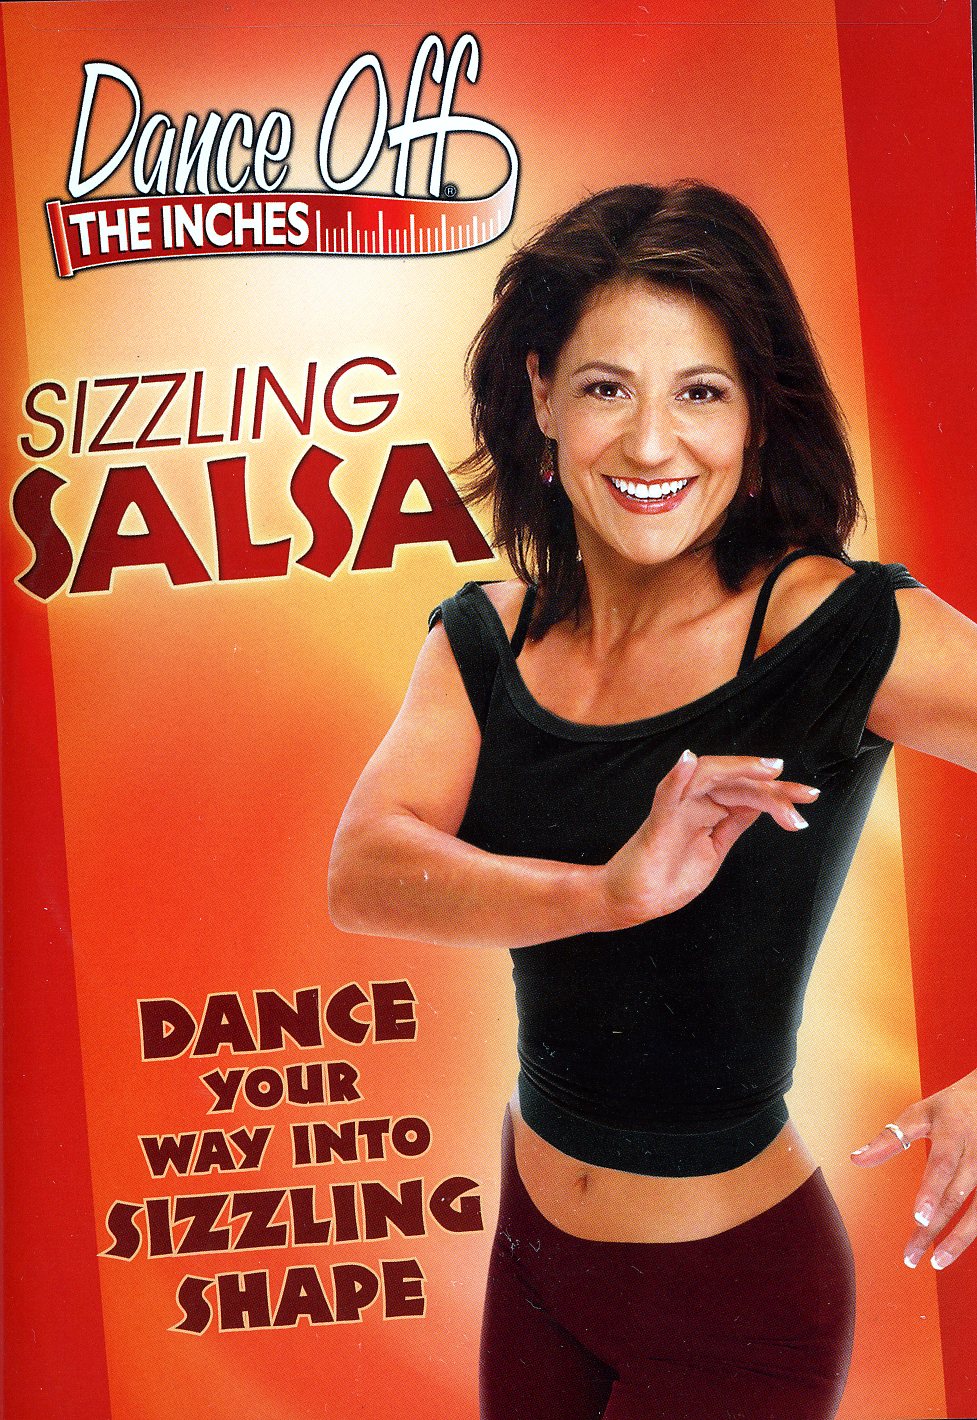 DANCE OFF THE INCHES: SIZZLING SALSA